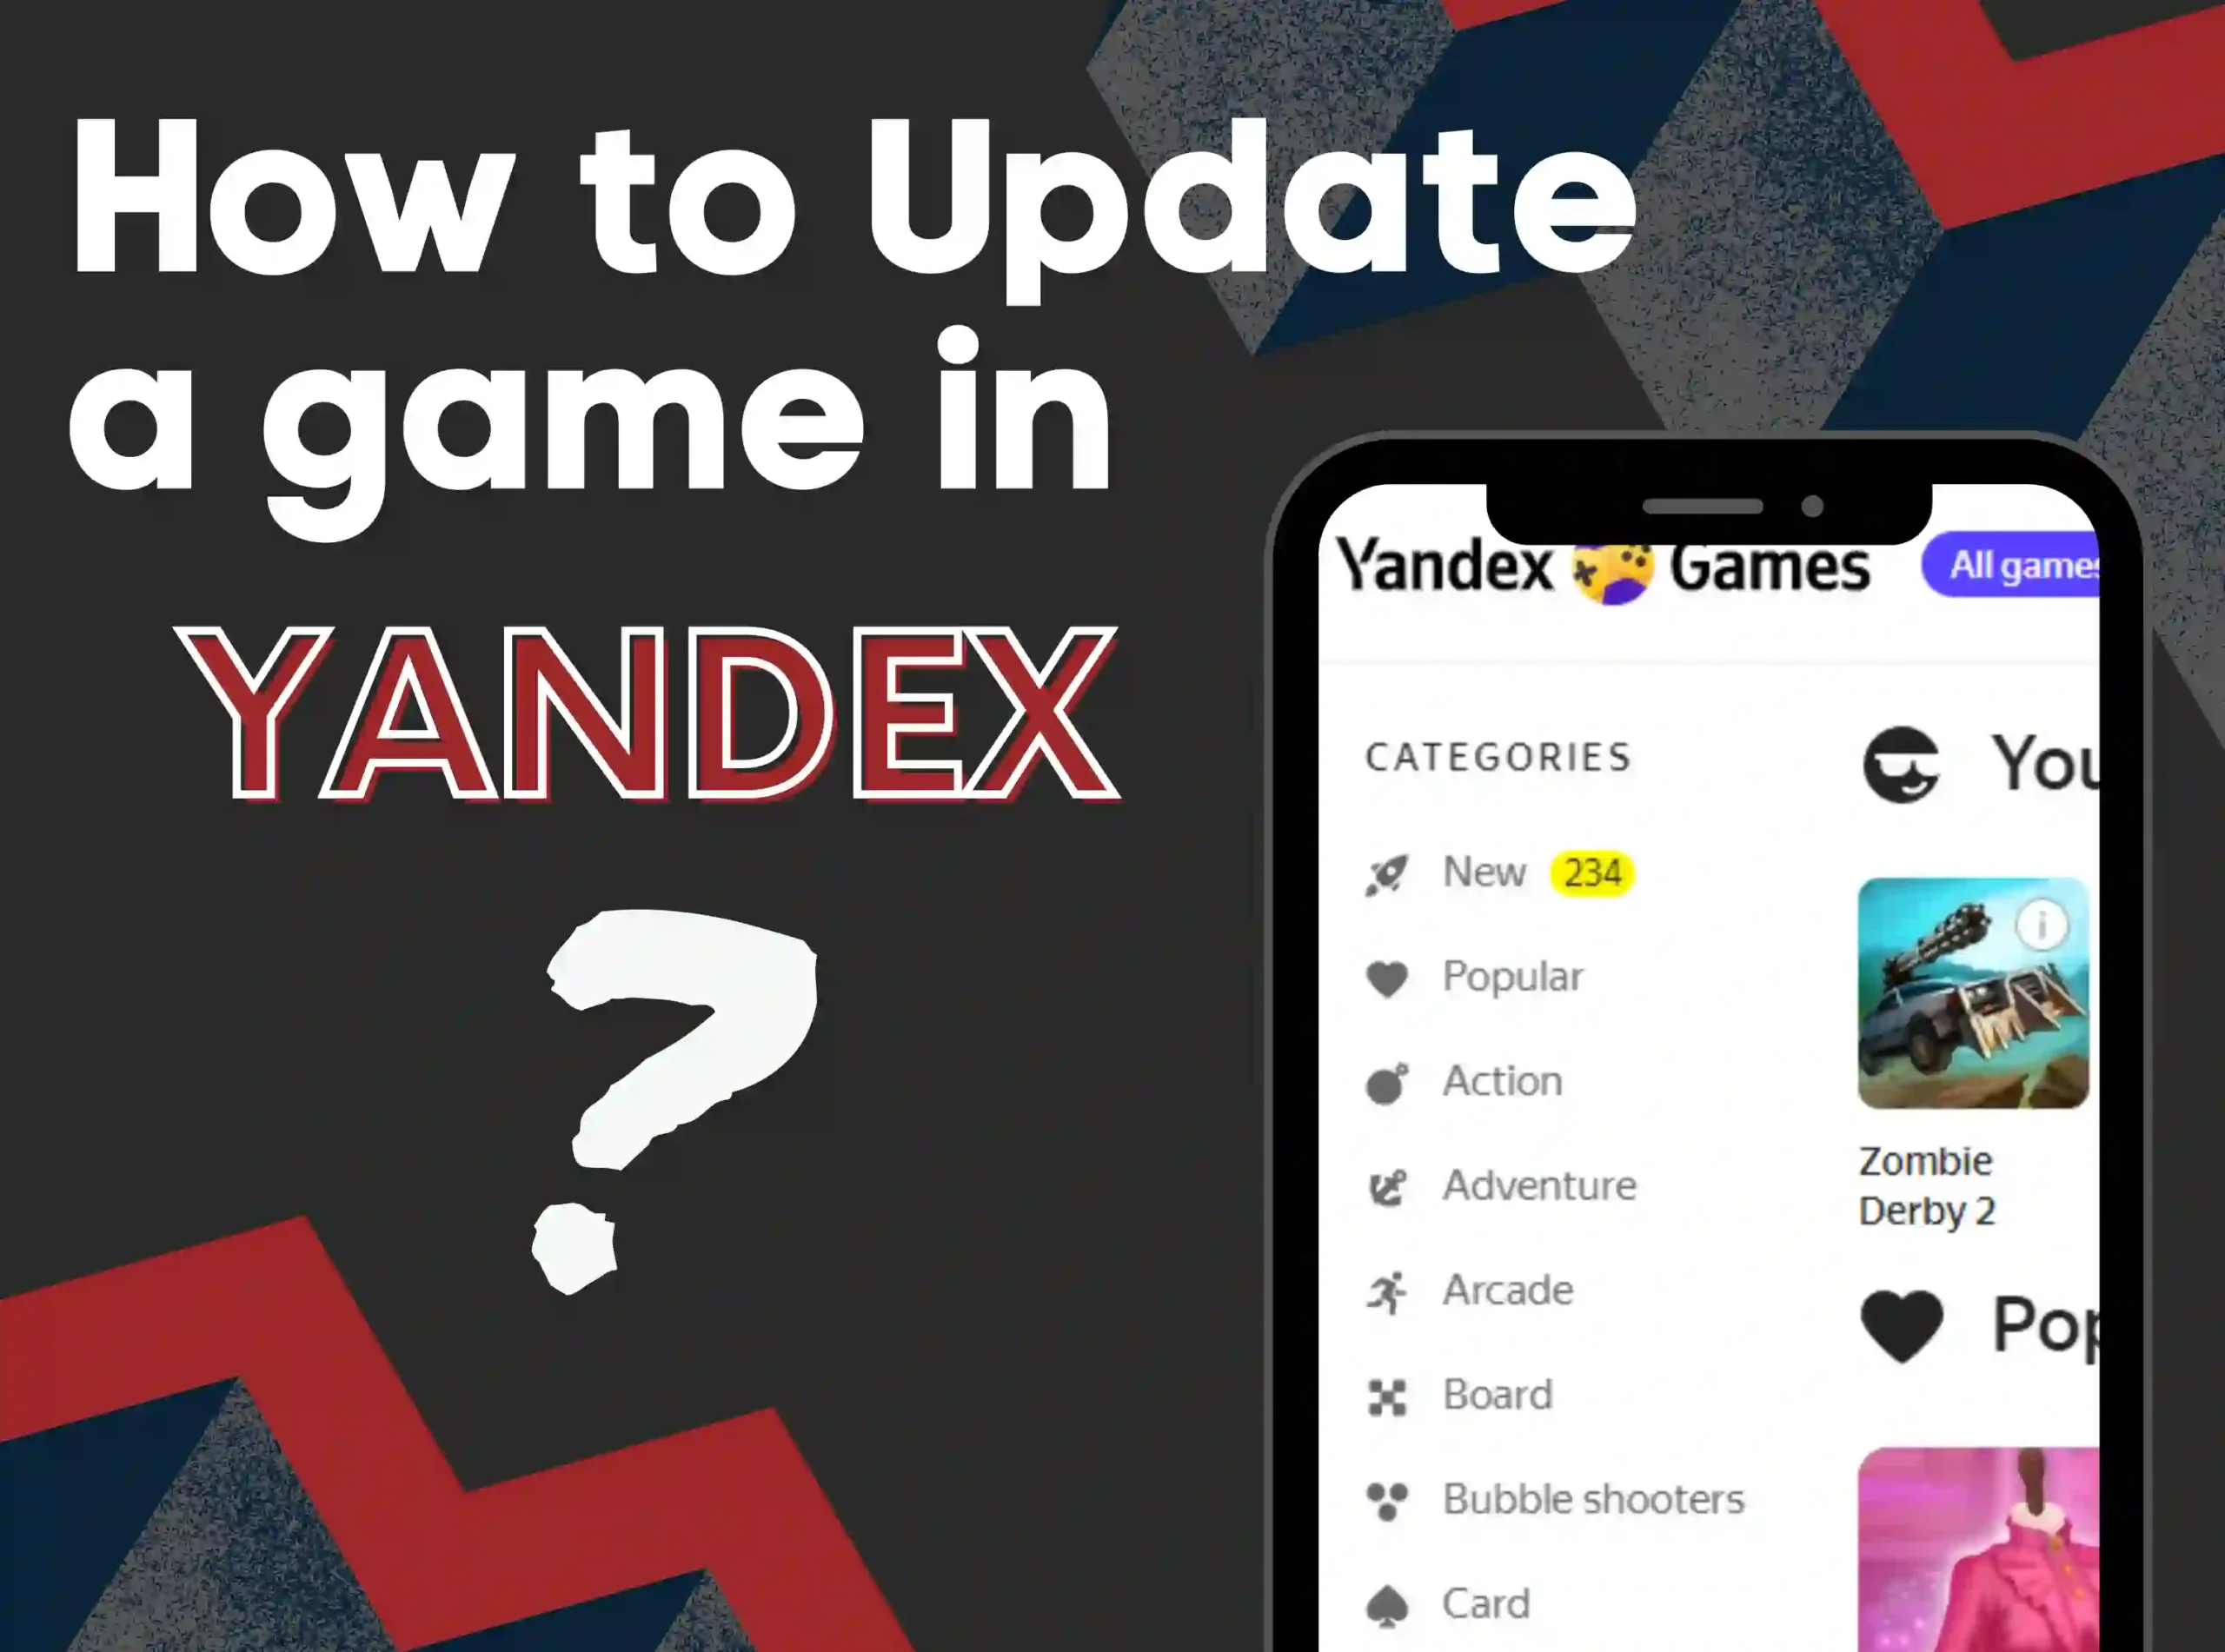 How to Update a game in Yandex